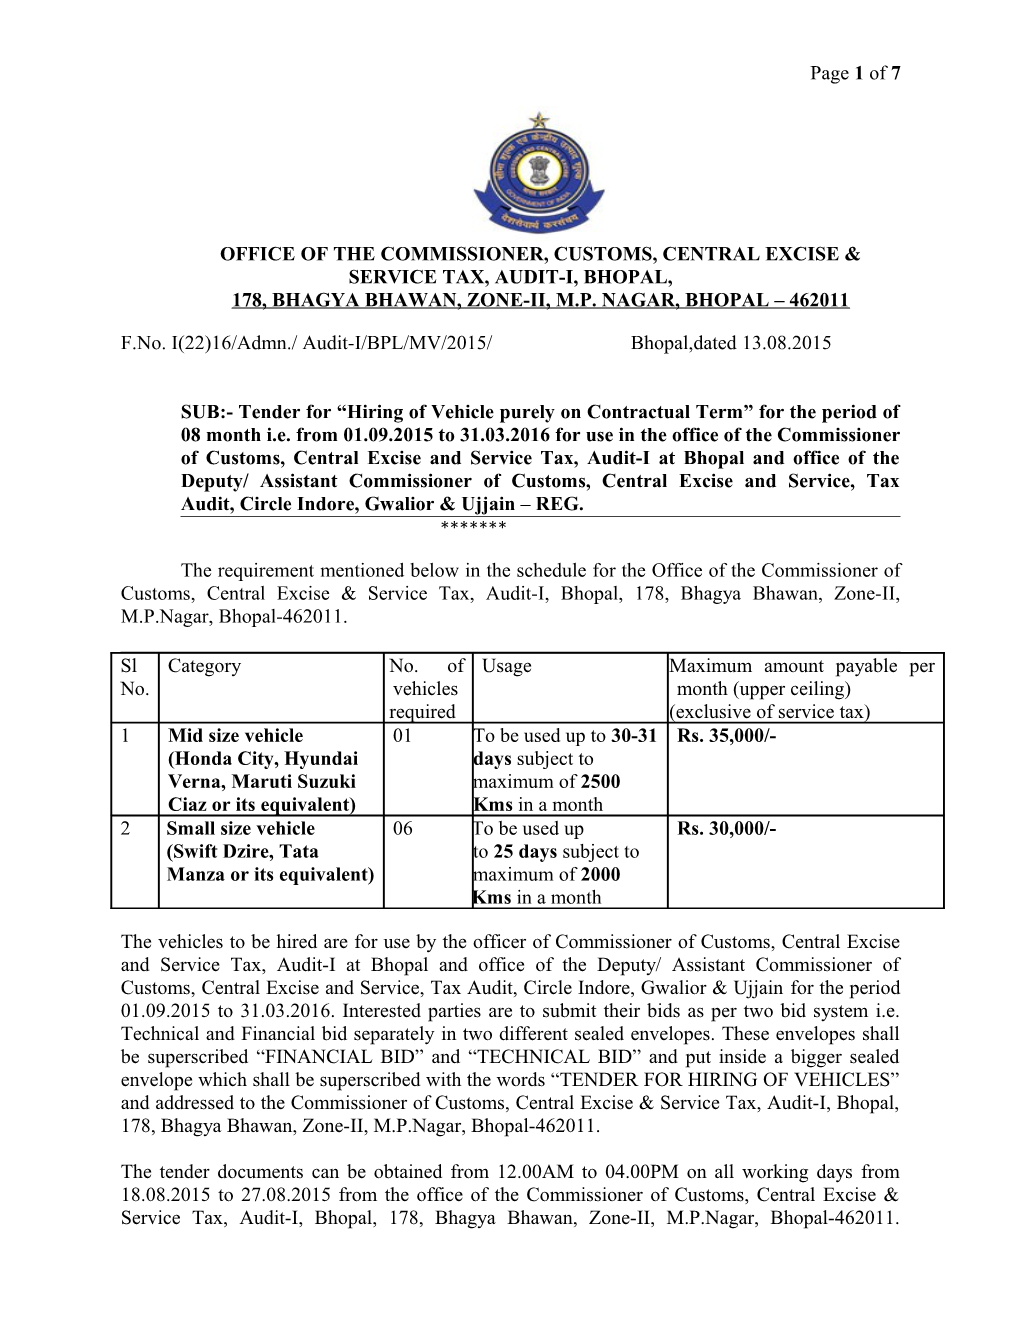 Office of the Commissioner, Customs, Central Excise & Service Tax, Audit-I, Bhopal